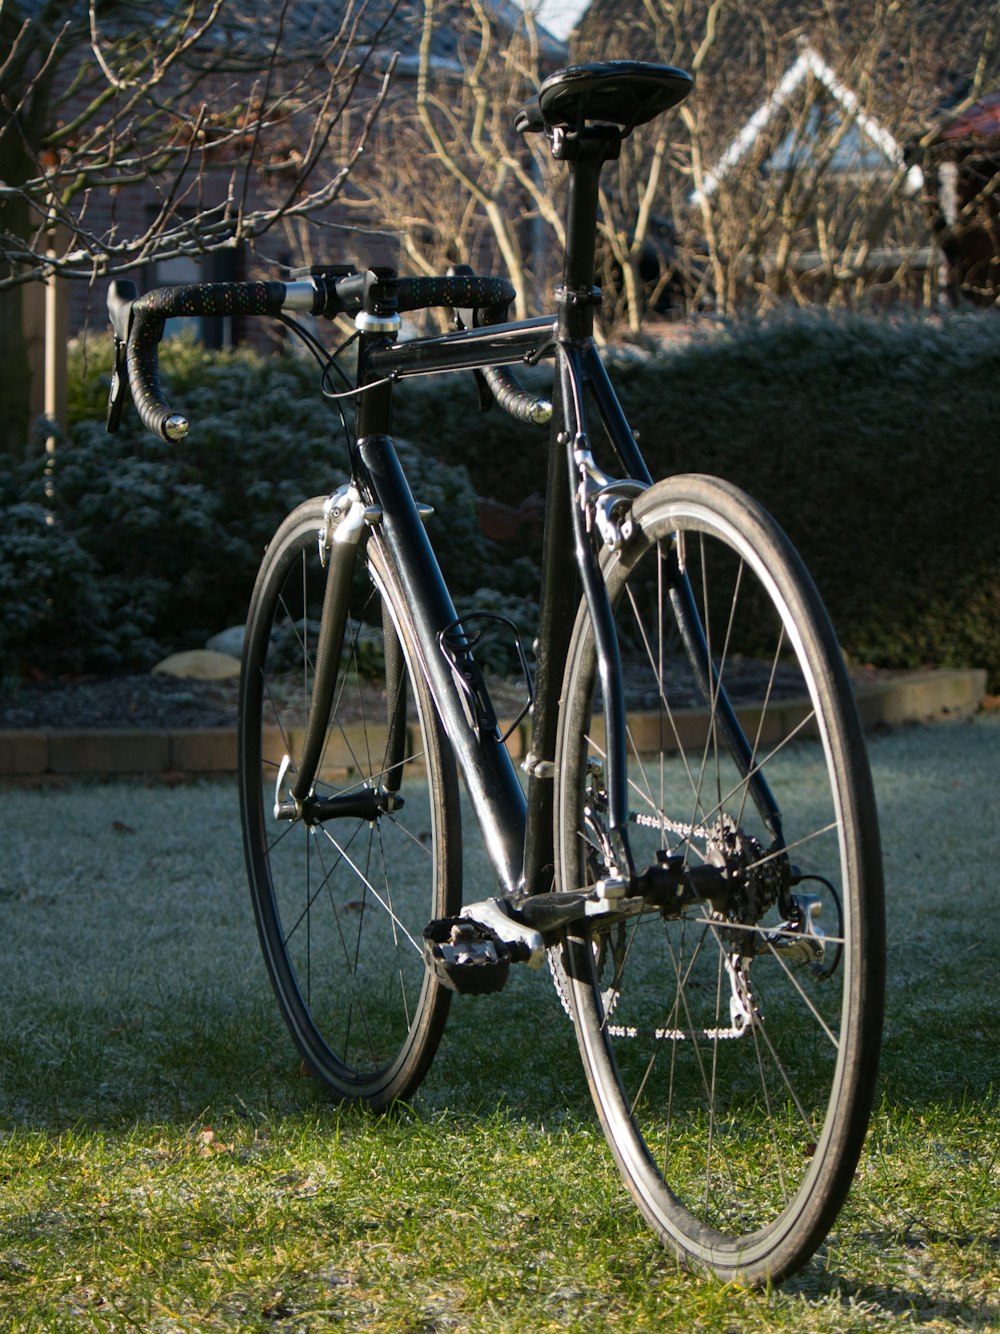 black and silver bicycle on green grass field during daytime